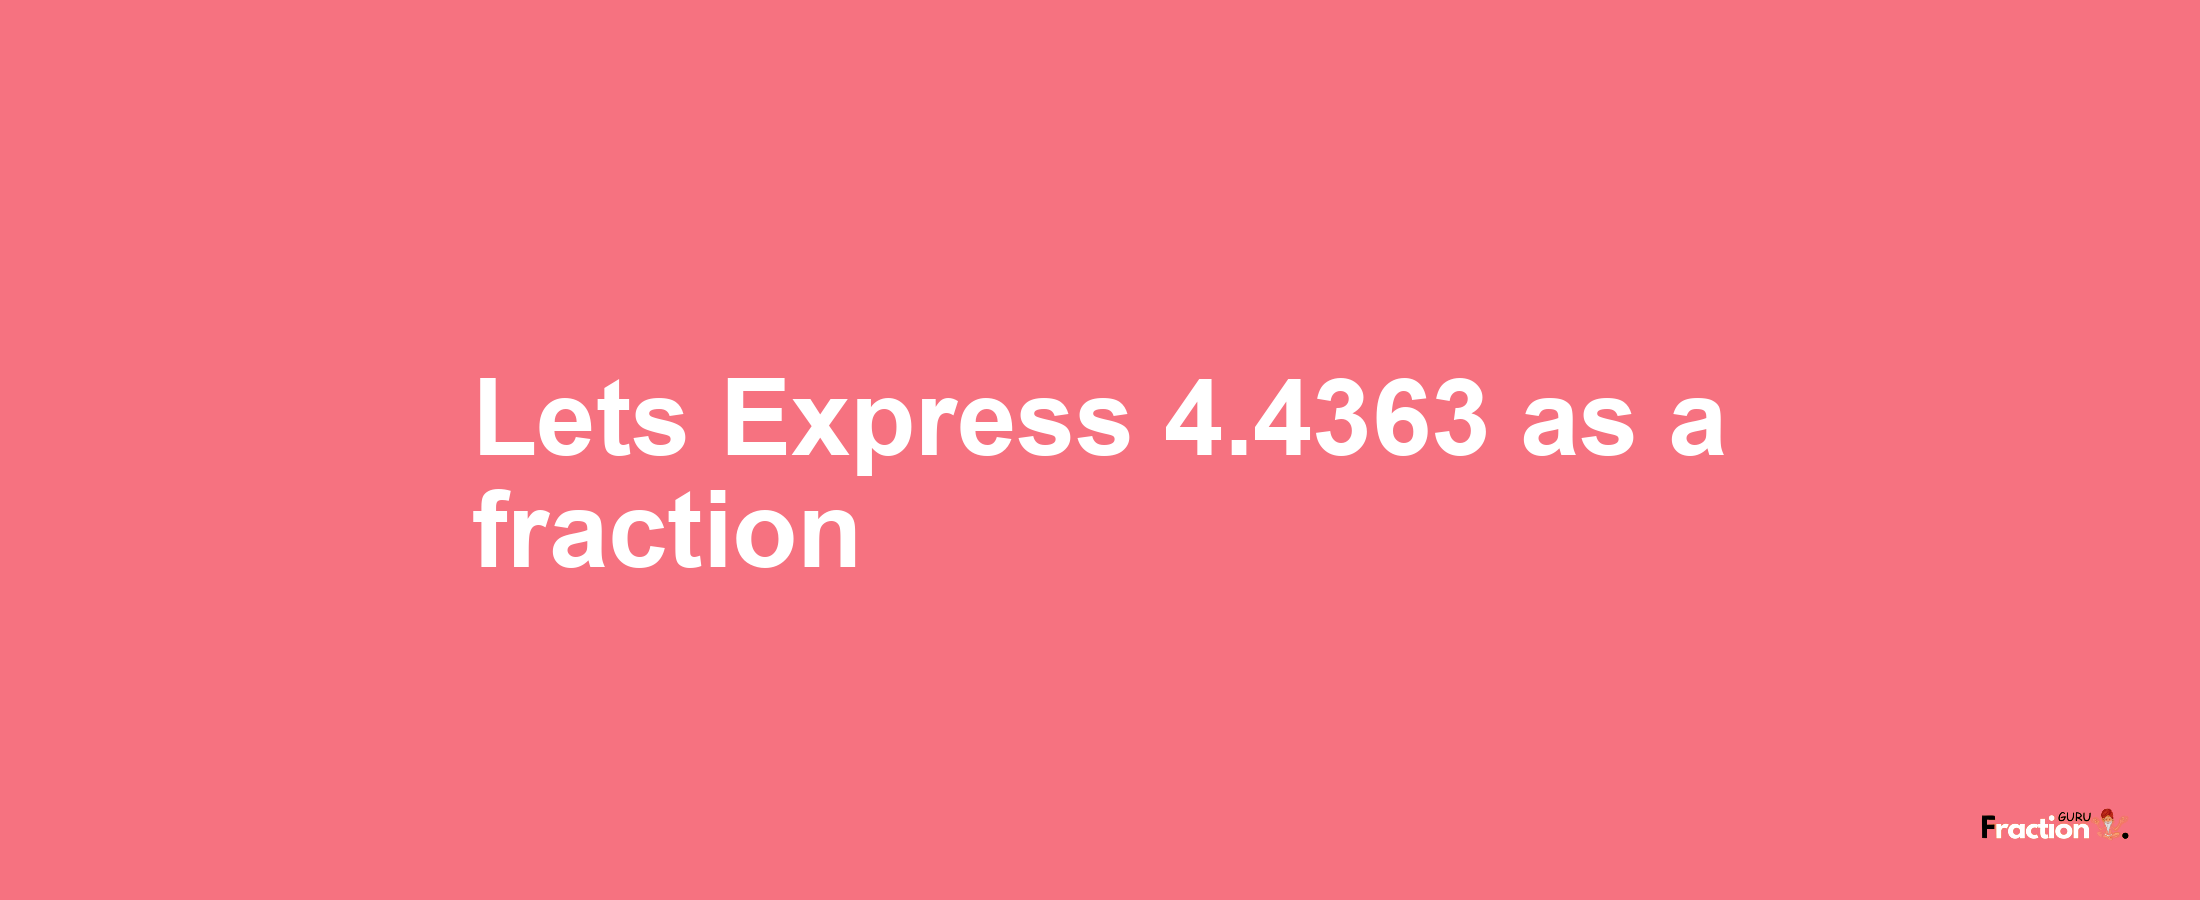 Lets Express 4.4363 as afraction